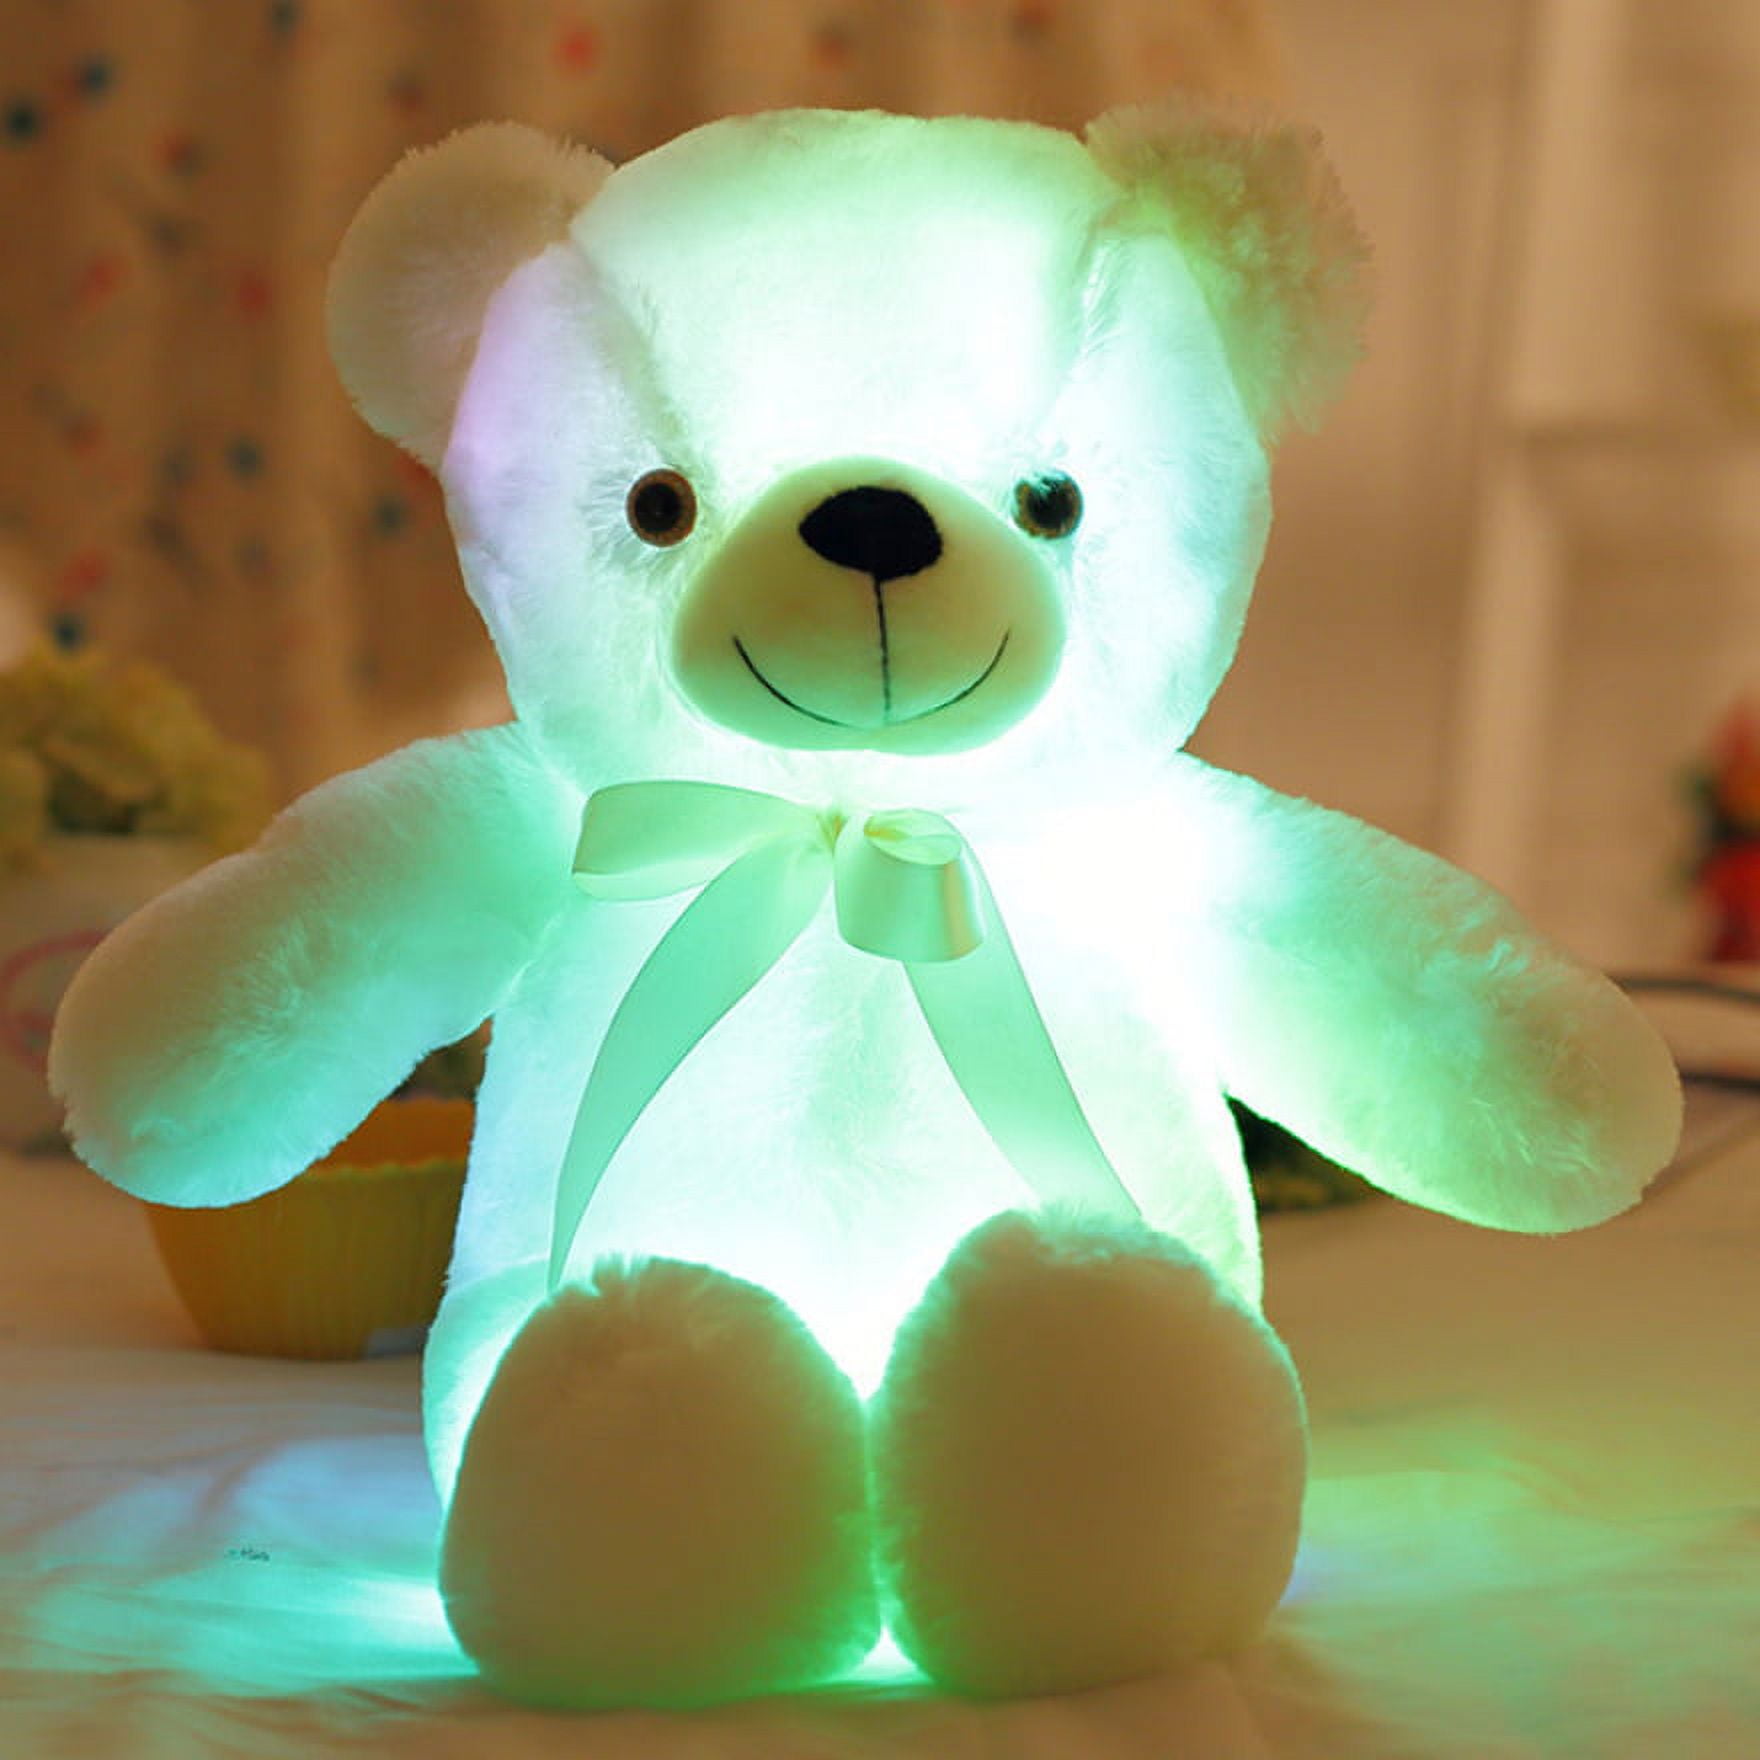 Jzenzero Glow Teddy Bear with Bow-tie Creatives Stuffed Animal Soft LED  Light Up Plush Toy For Adults Kids New | Leuchtfiguren